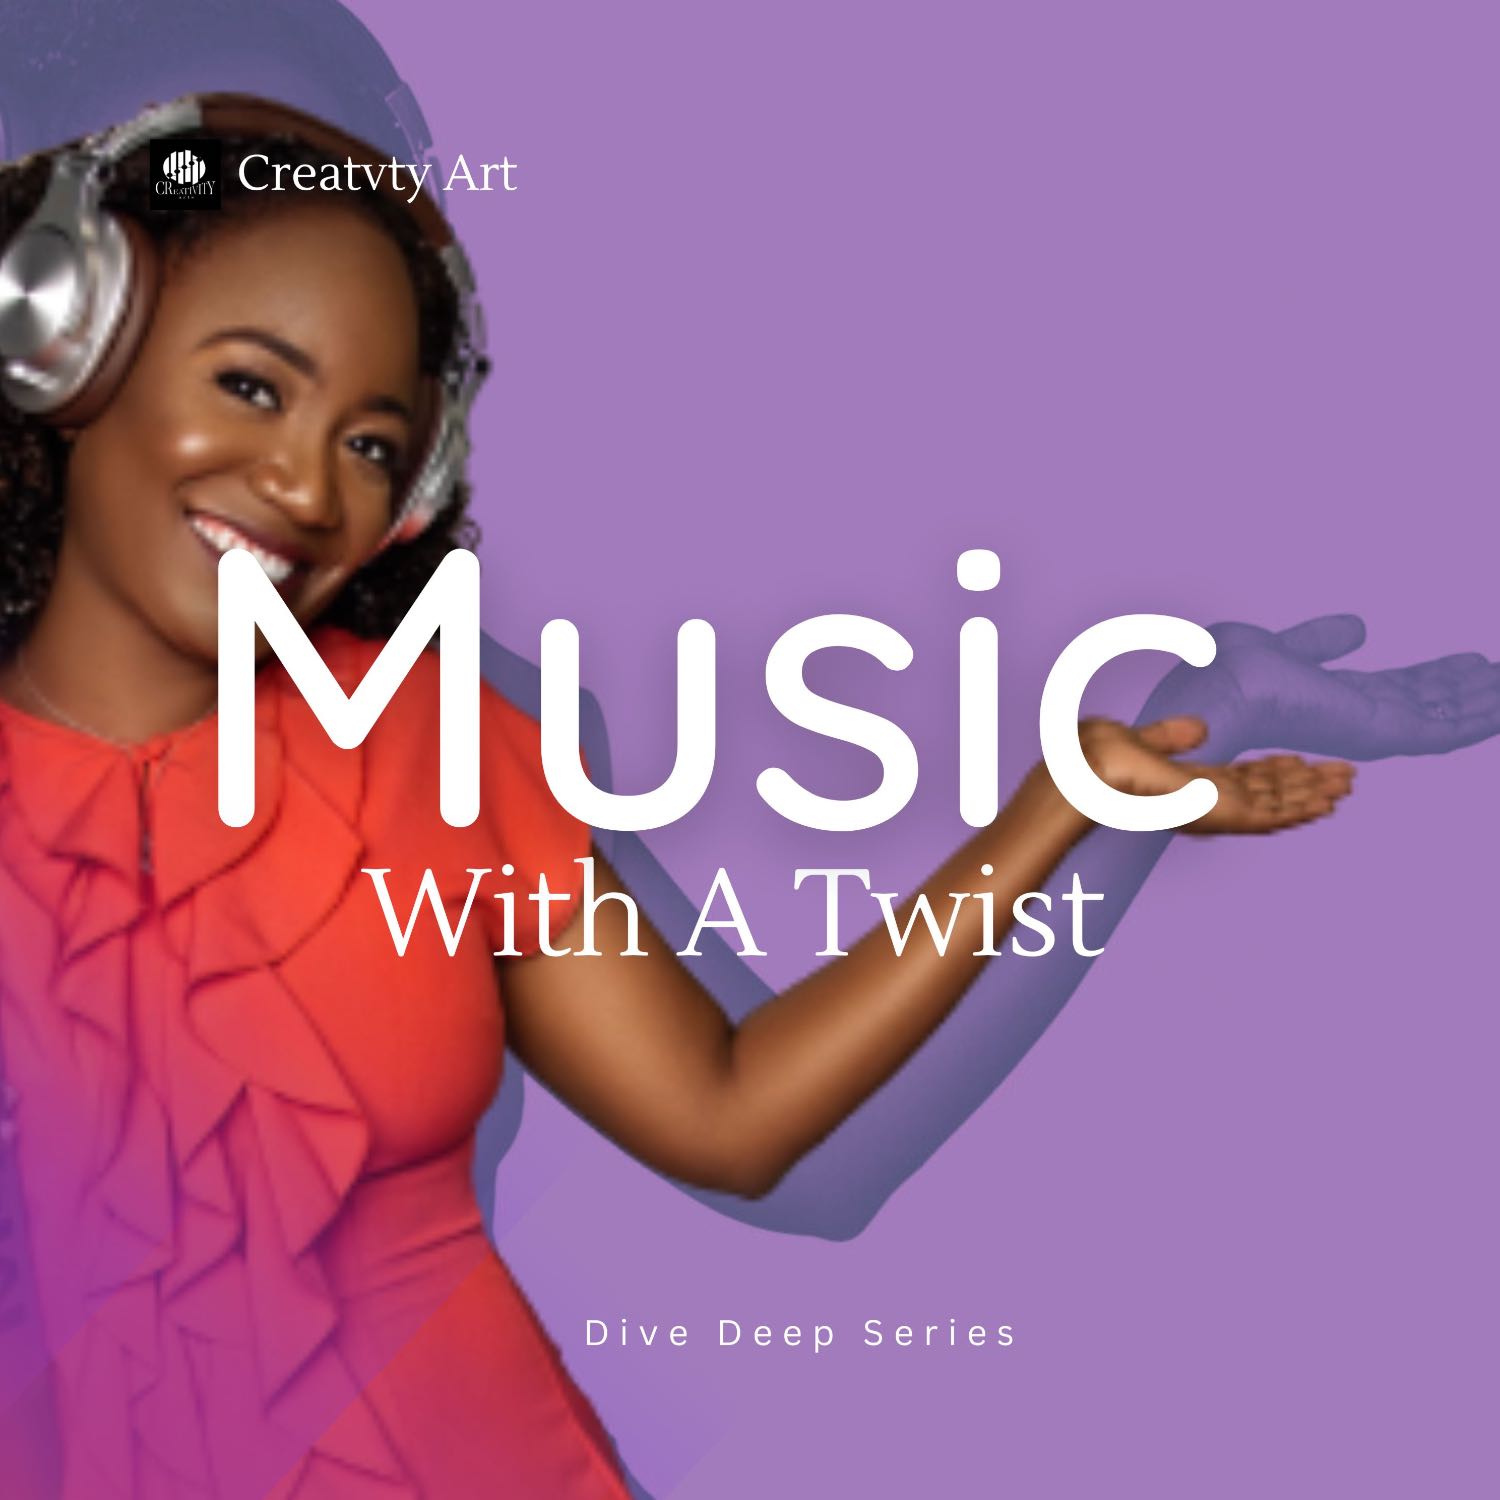 Music With A Twist: Artist Talk with Varcy Duncombe